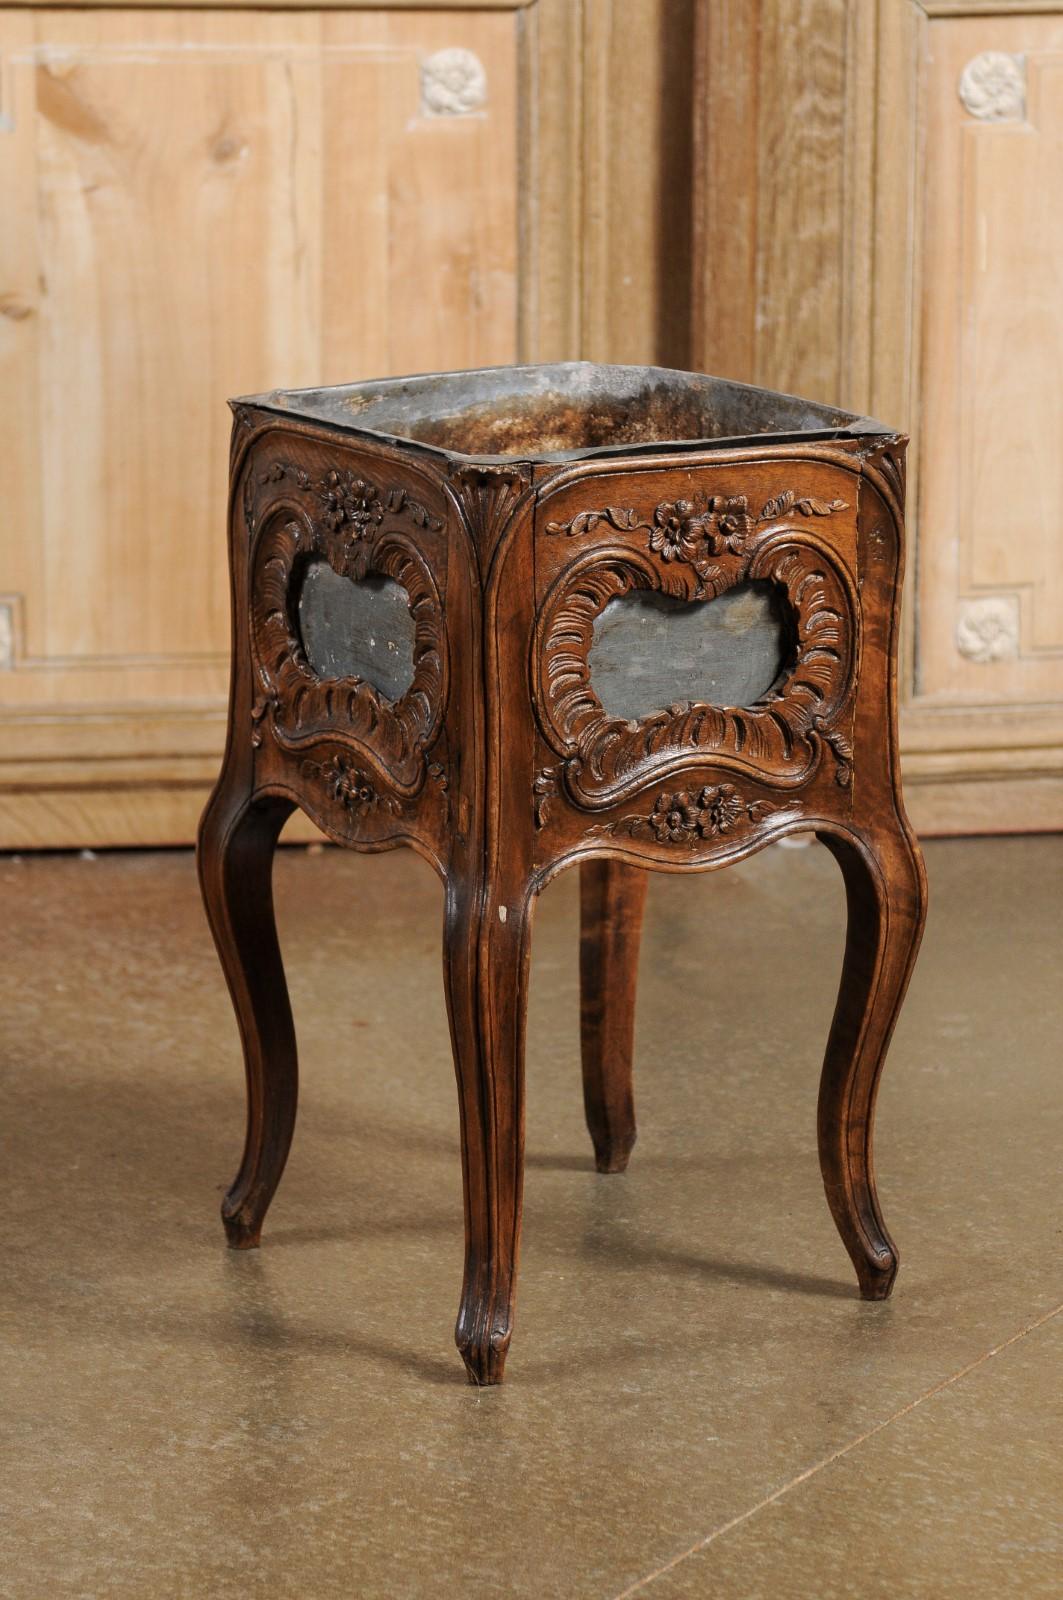 Carved French 1890s Rococo Revival Walnut Planter with Rocailles and Floral Motifs For Sale